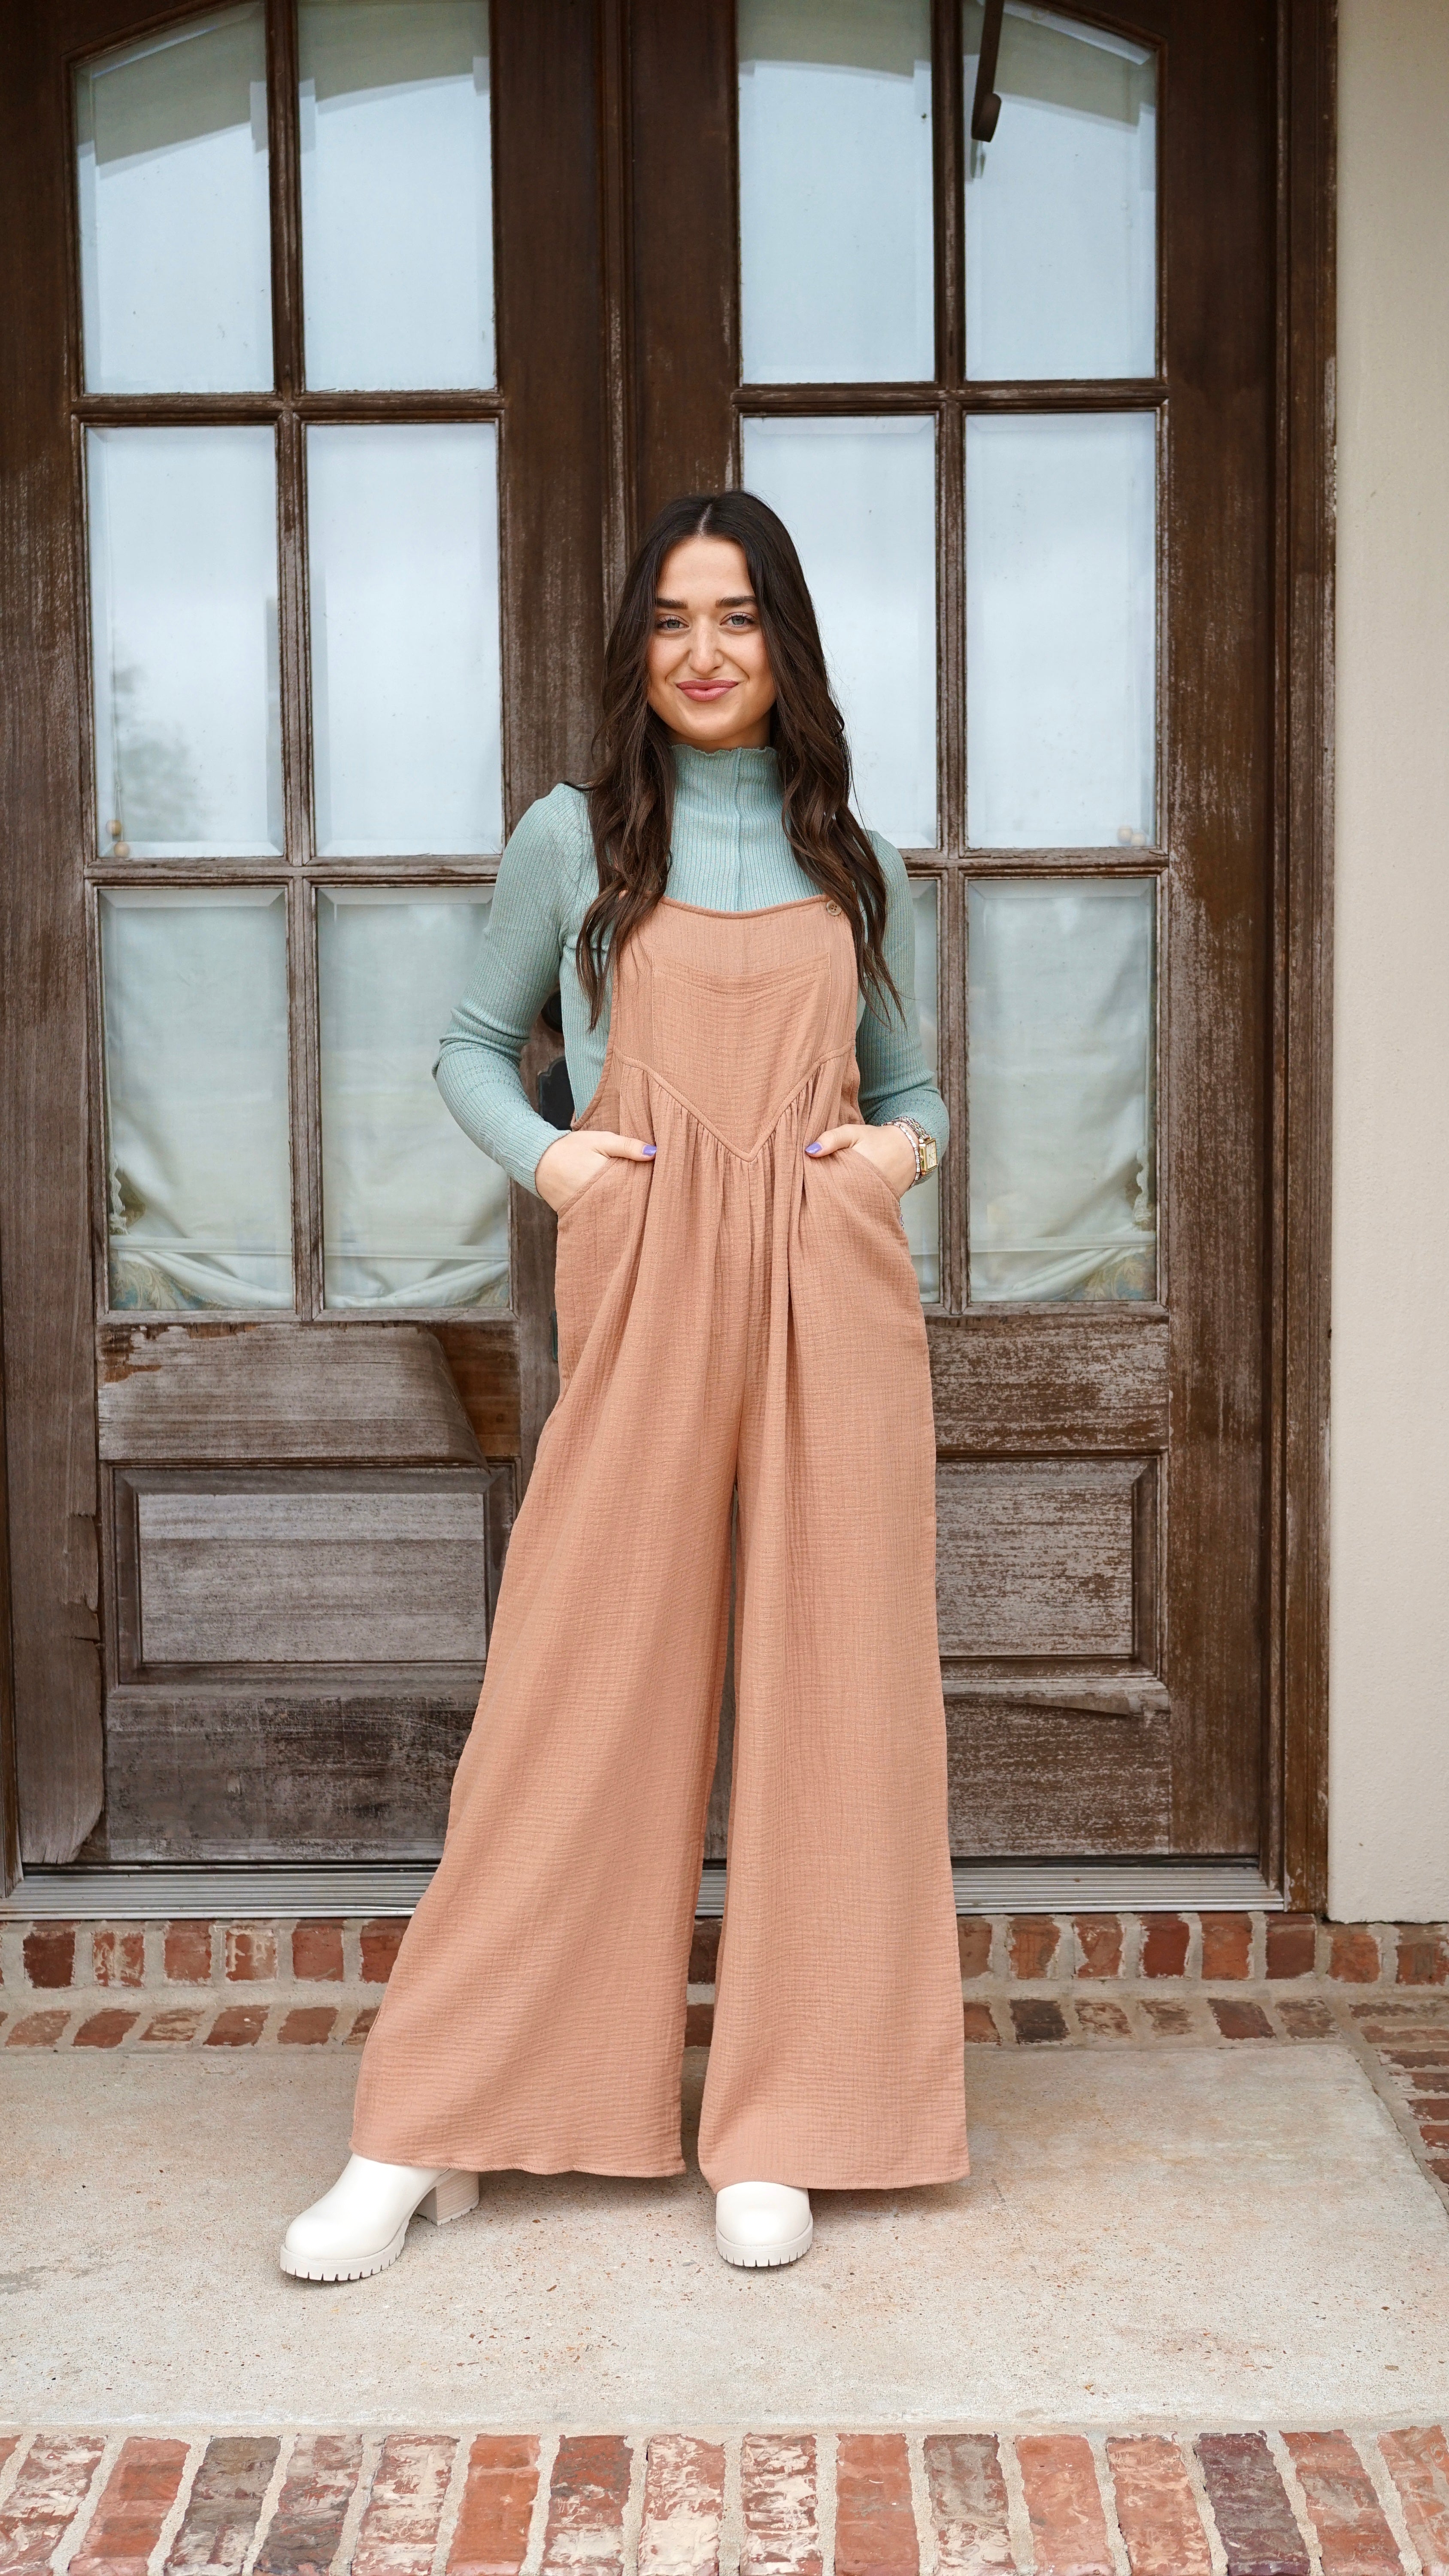 The Simple Life Tan Overalls